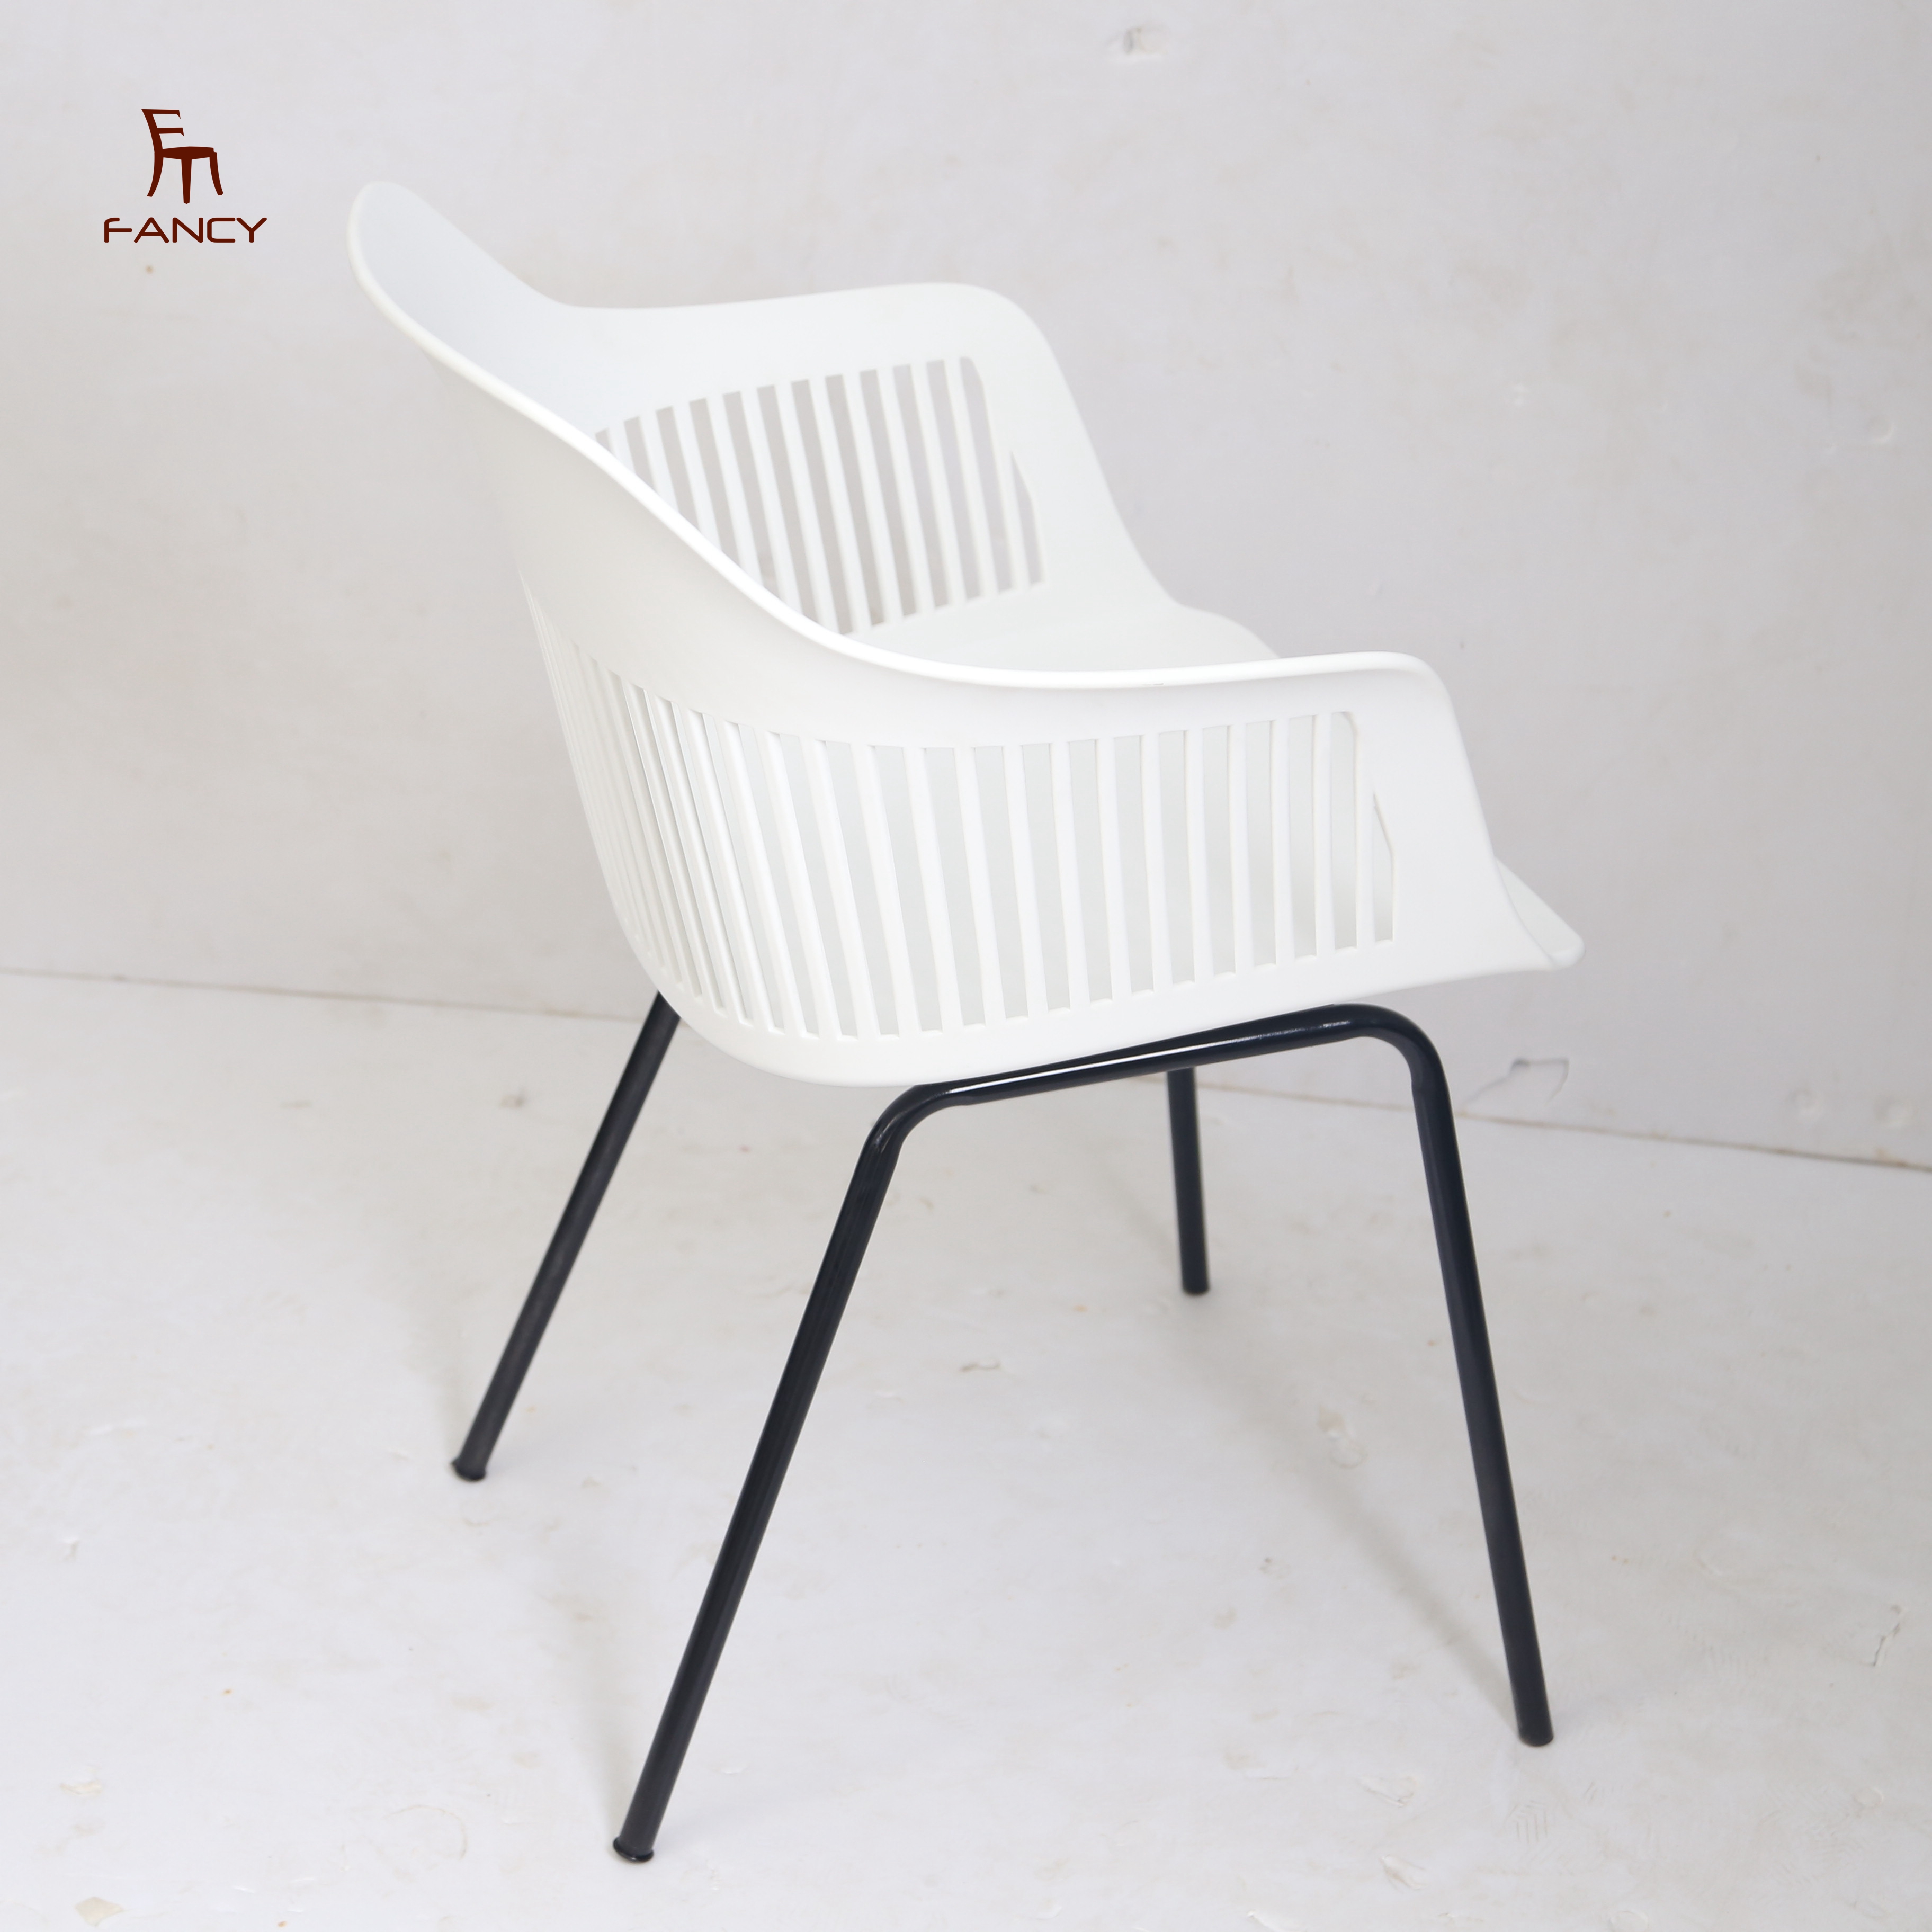 Fancy New Style Plastic chairs PP Plastic Metal Legs For Dining Room 